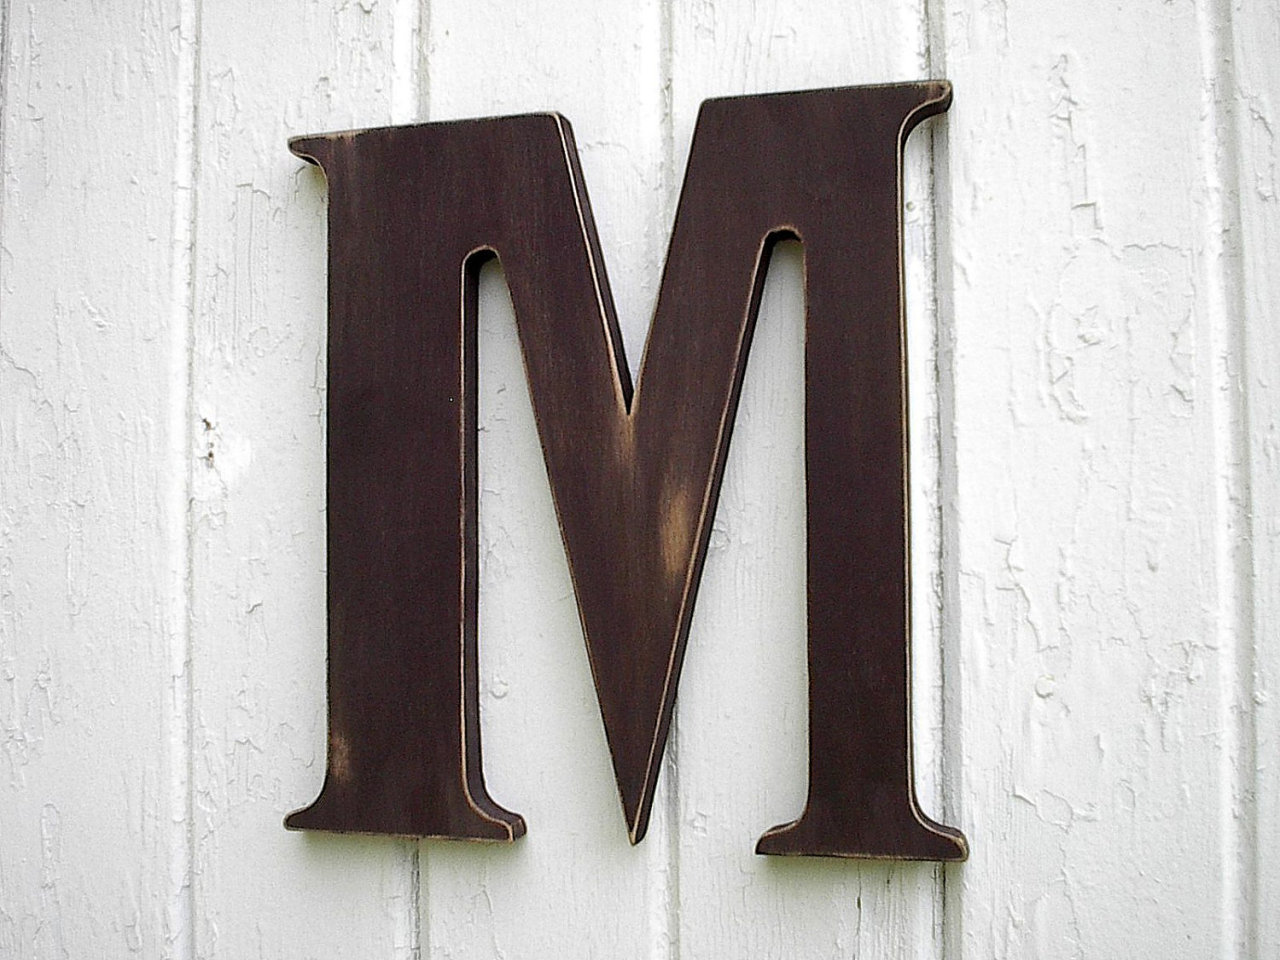 30 Large Wooden Letters for Guestbook Alternative Wooden Letters Wedding Guest Book Monogram Initials Sign